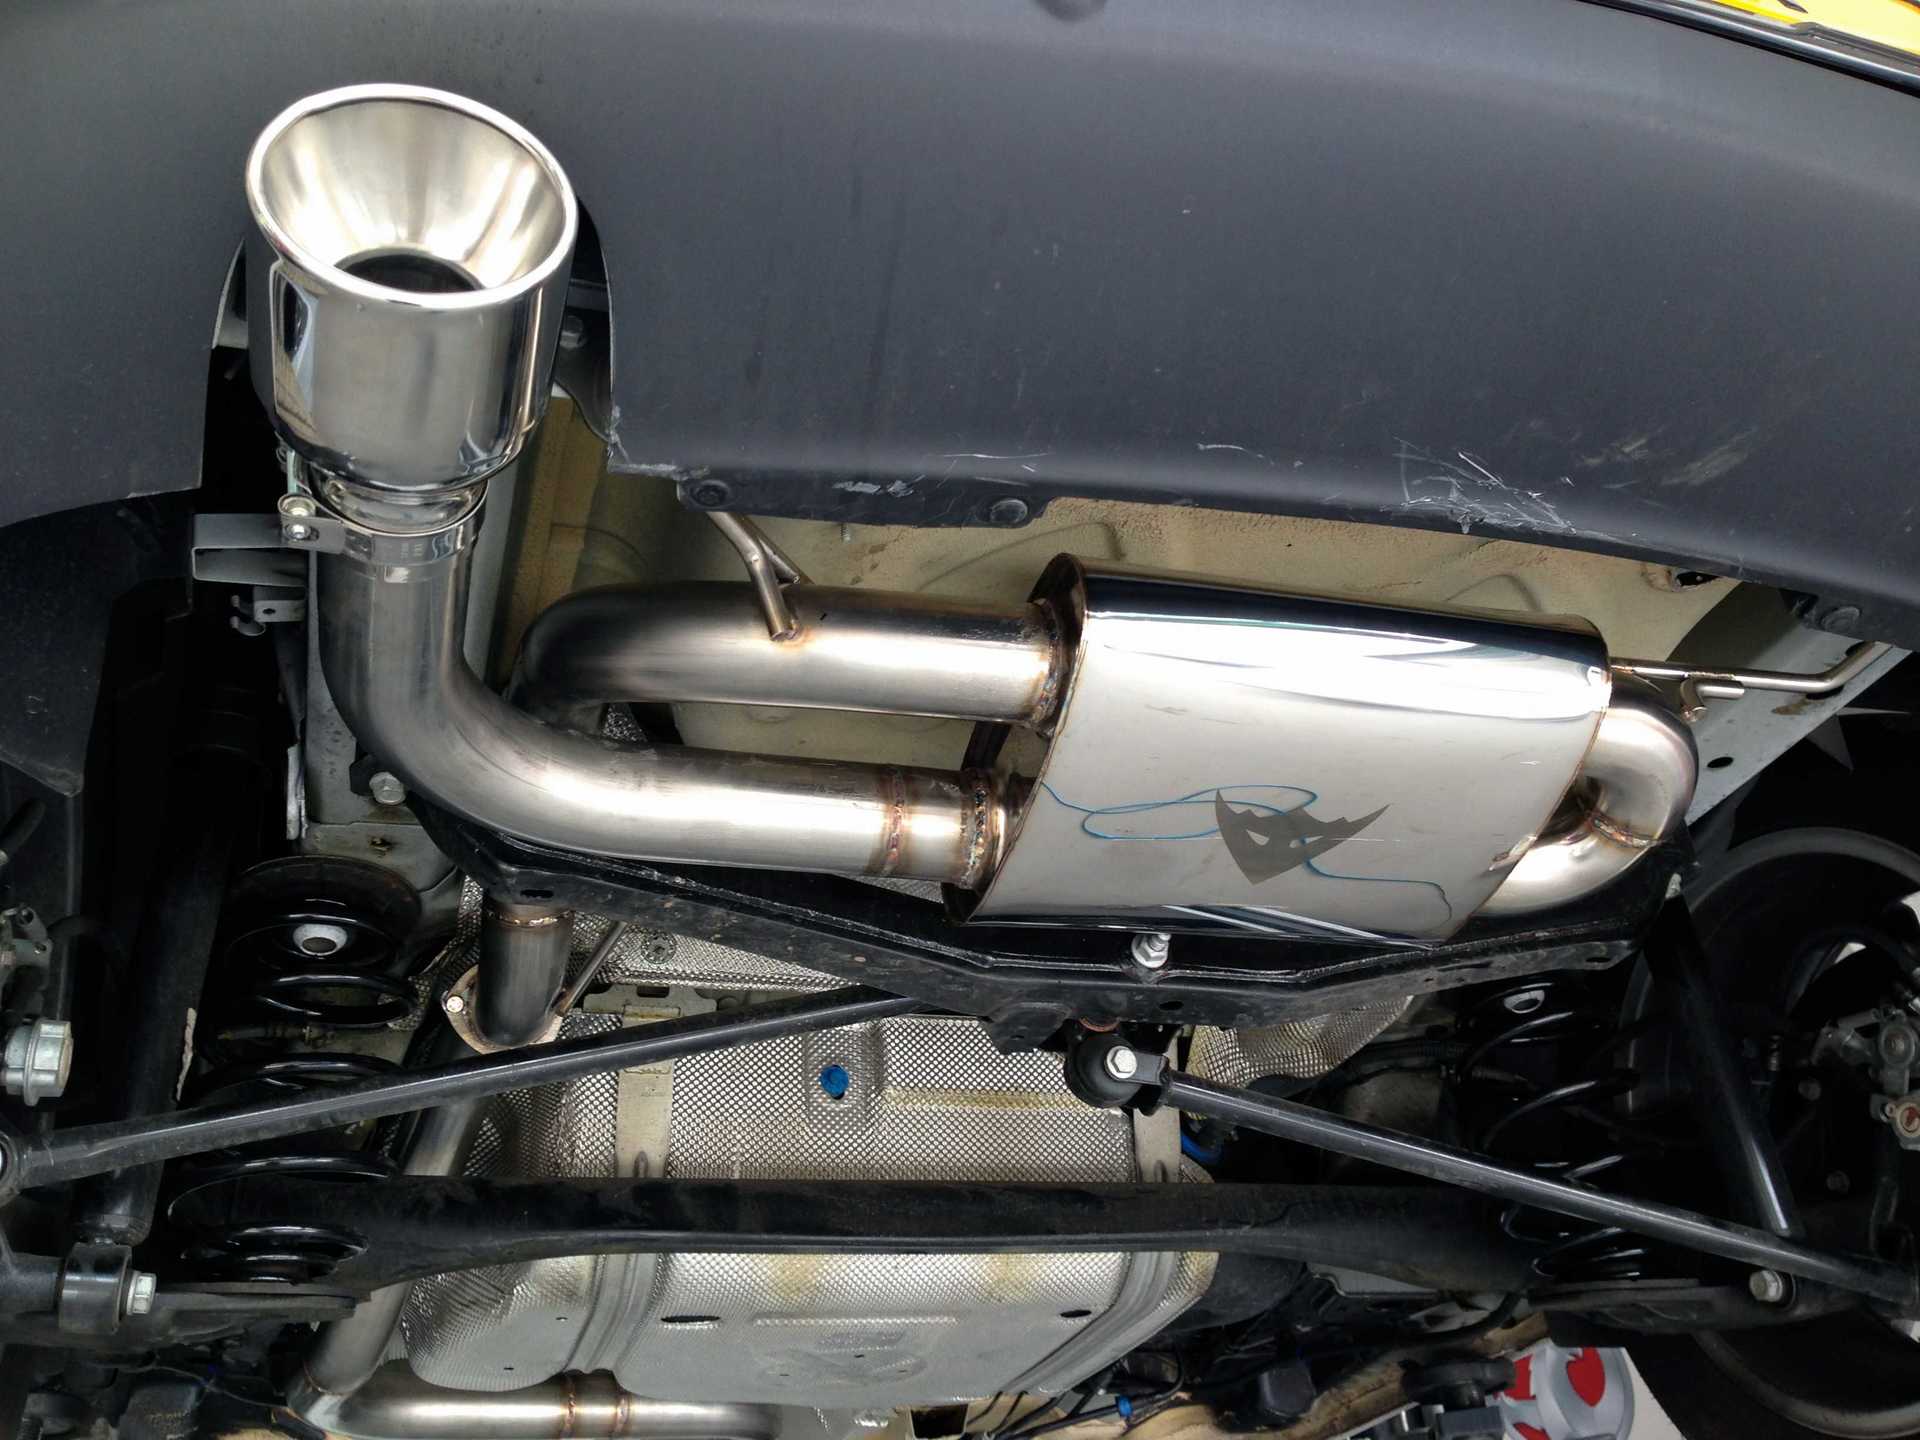 Best Vauxhall Astra Exhaust System | DKU Performance image